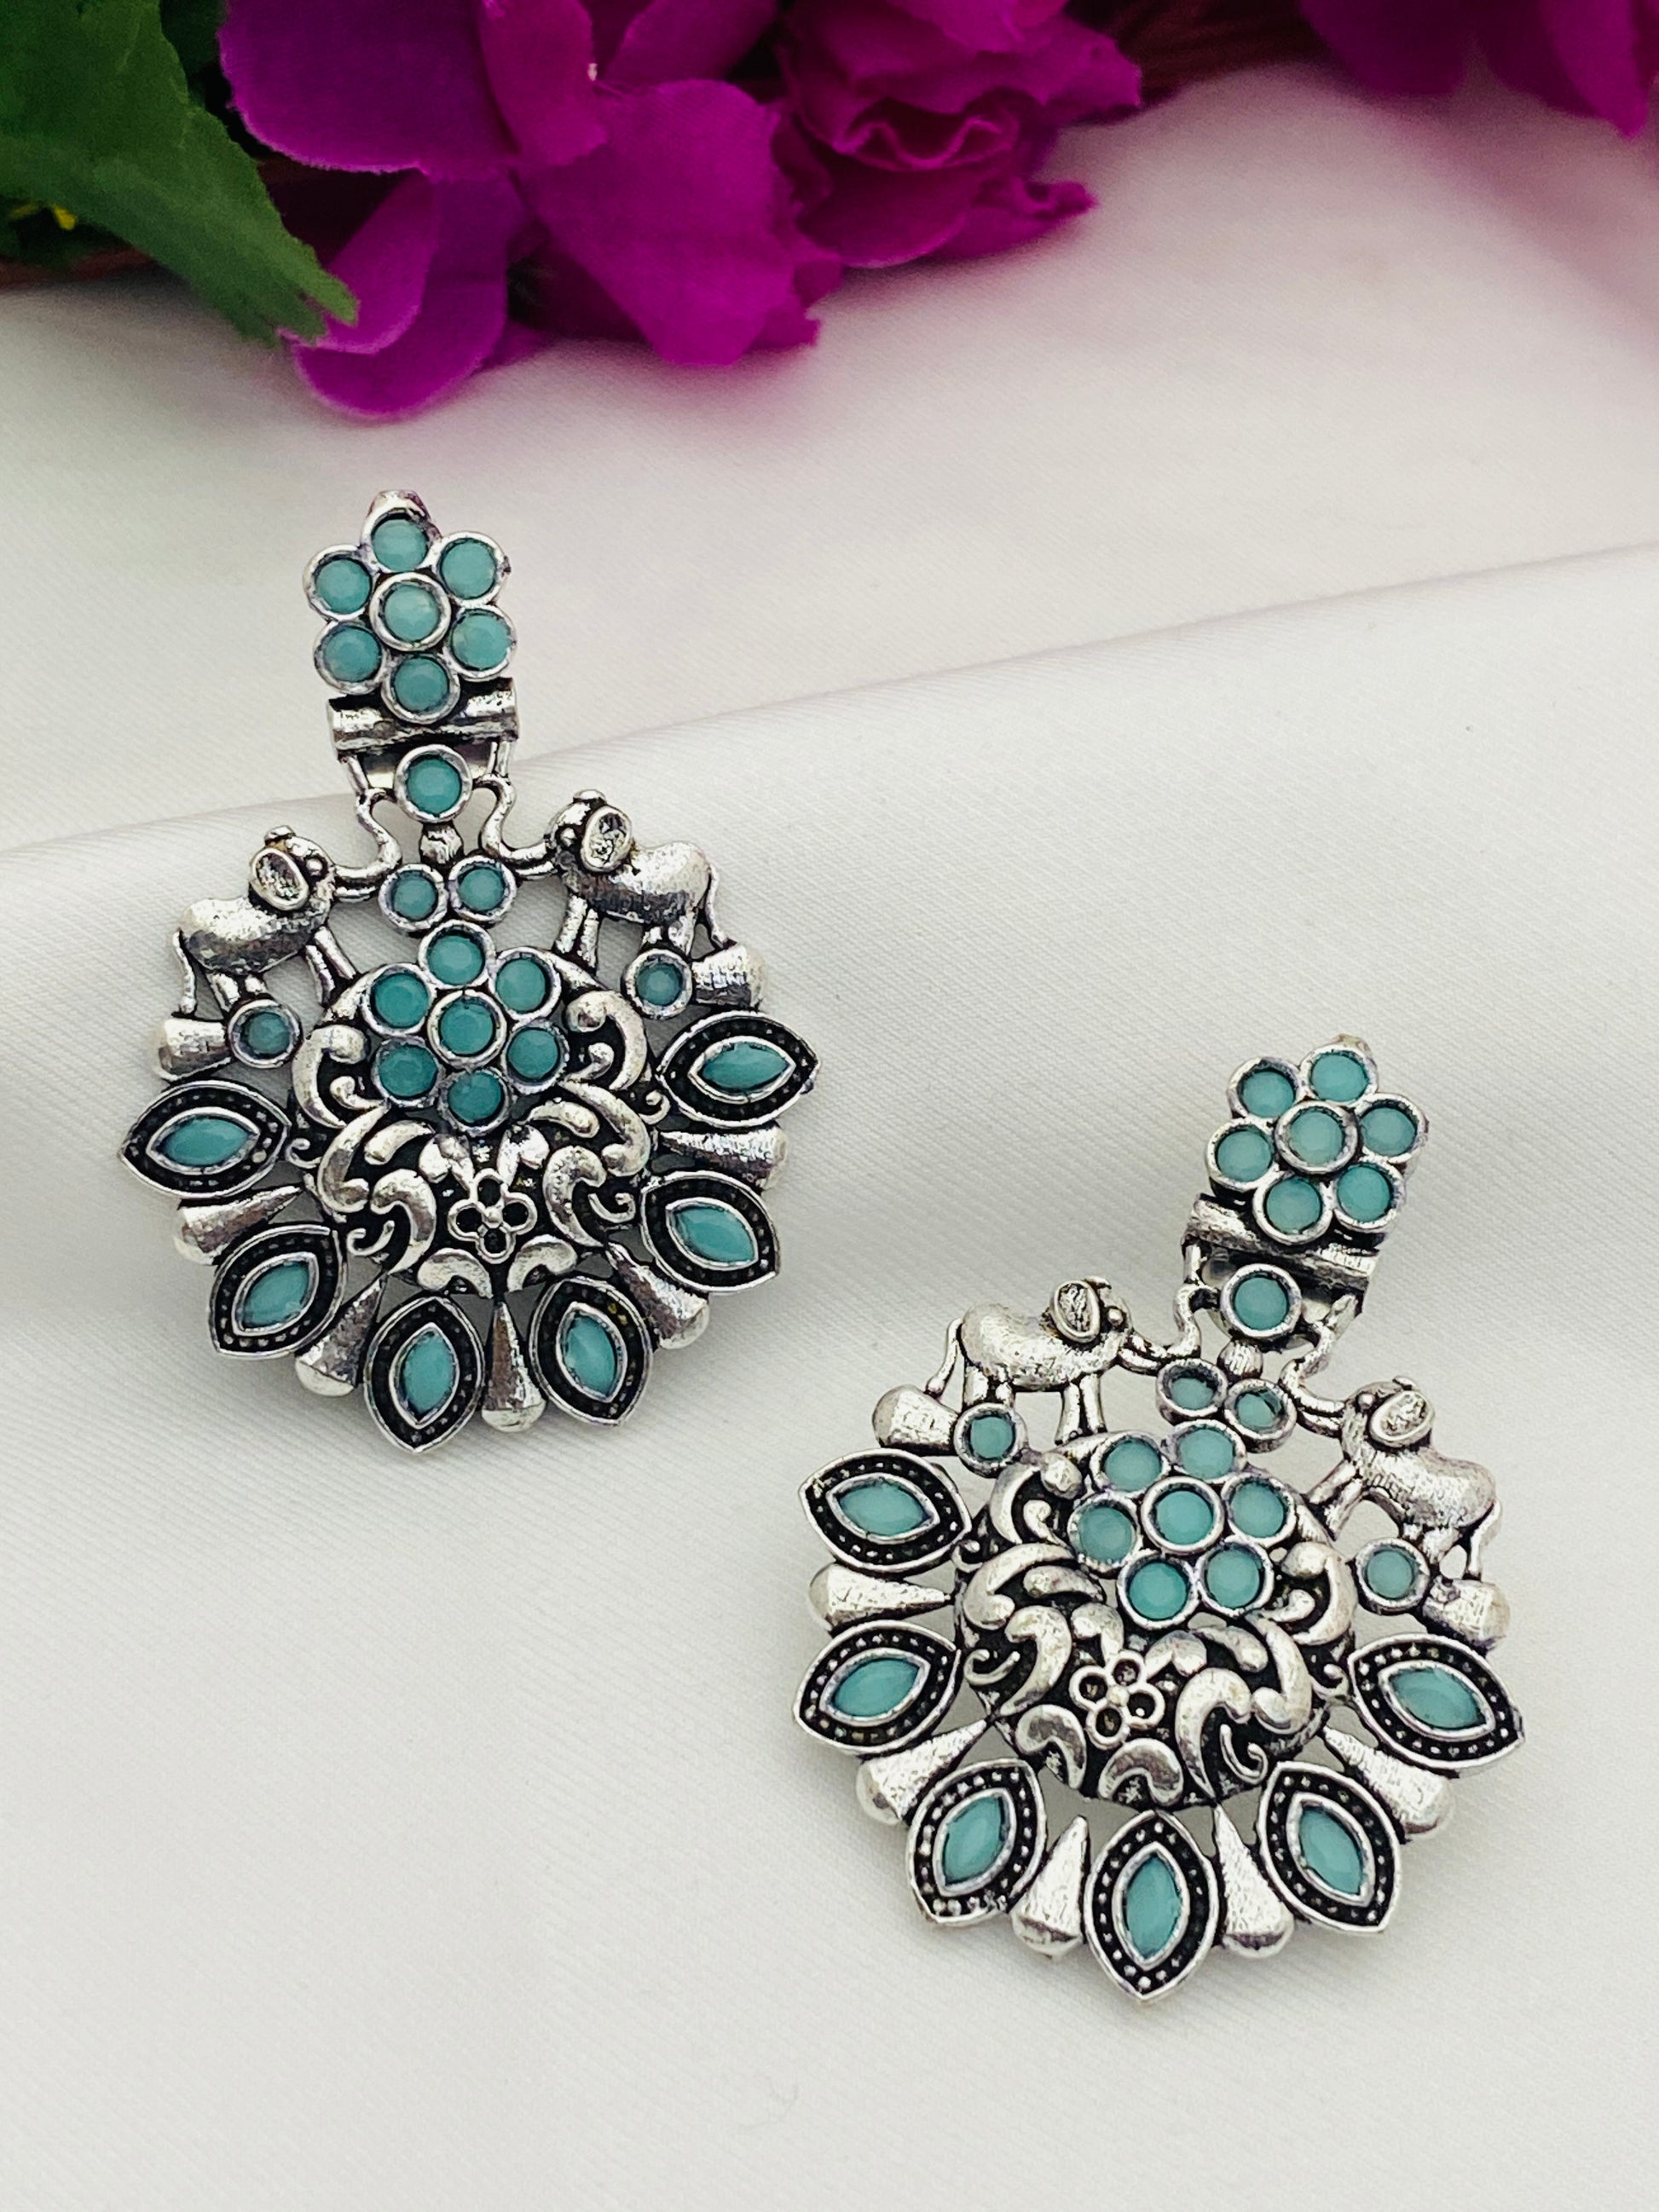 Stylish Skyblue Floral Designer Silver Oxidized Earrings For Women In Tempe